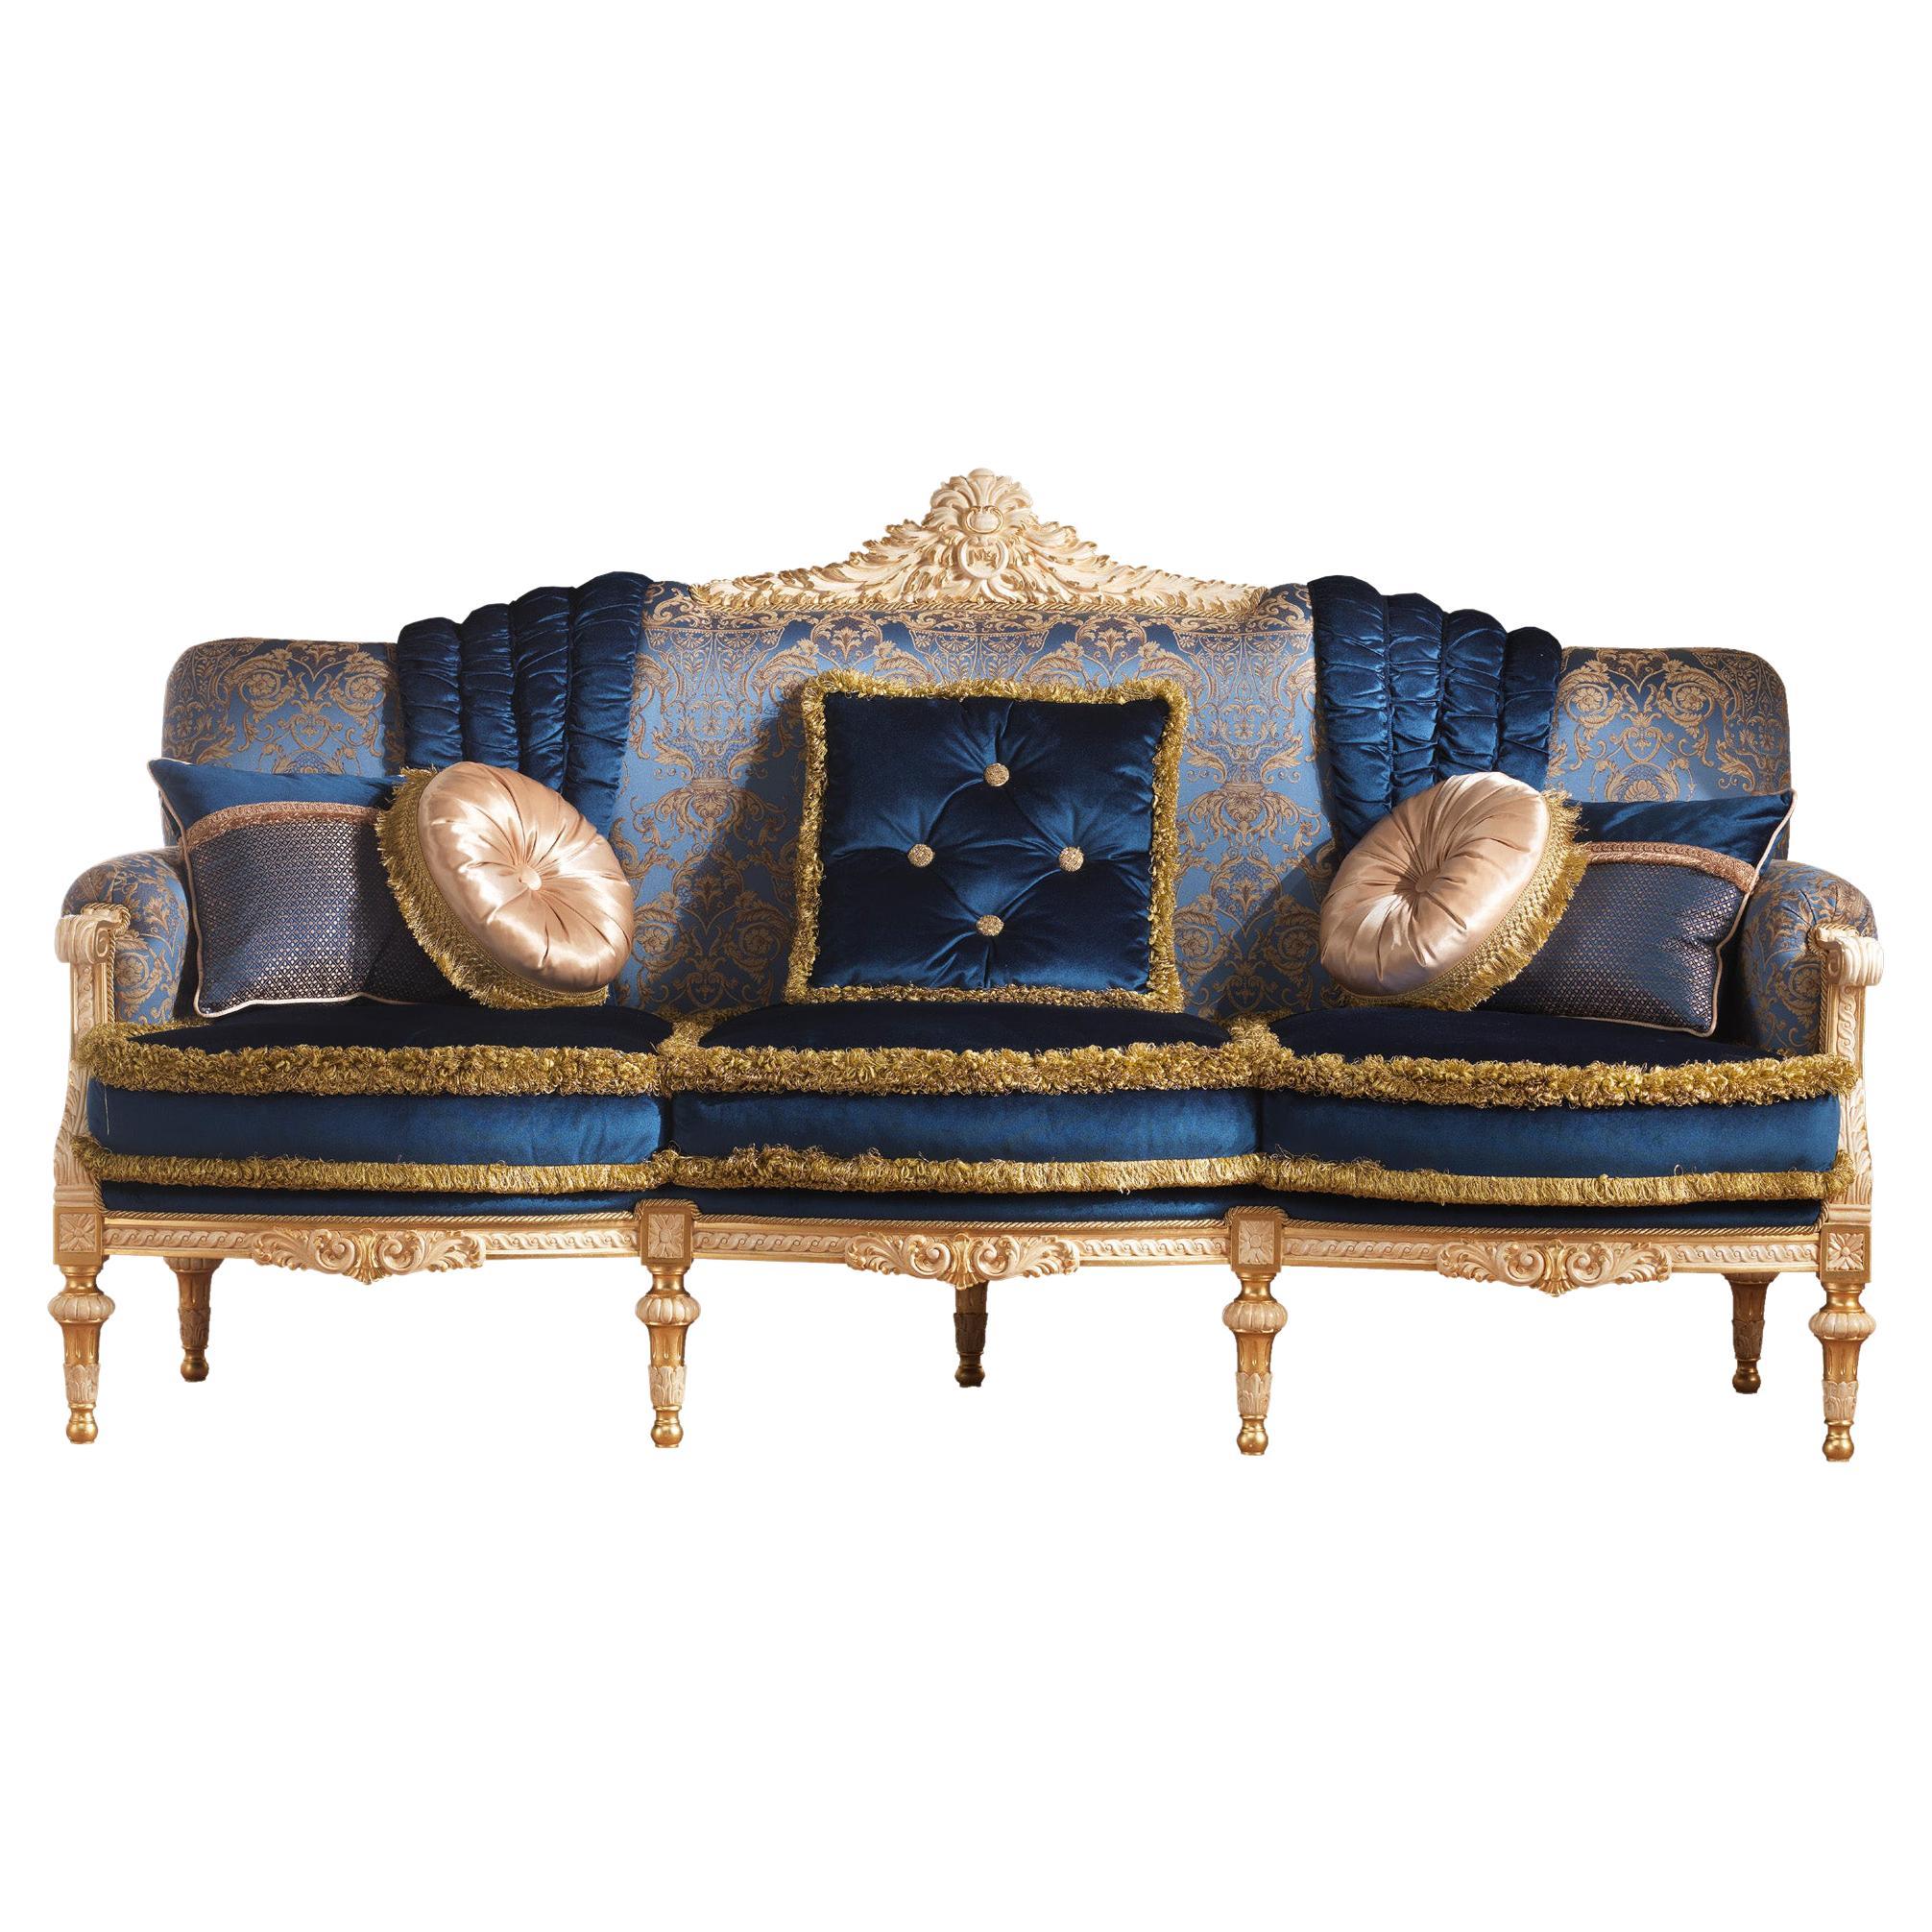 Noble Venetian Sofa in Massive Wood and Ivory Laquered with Gold Leaf Details